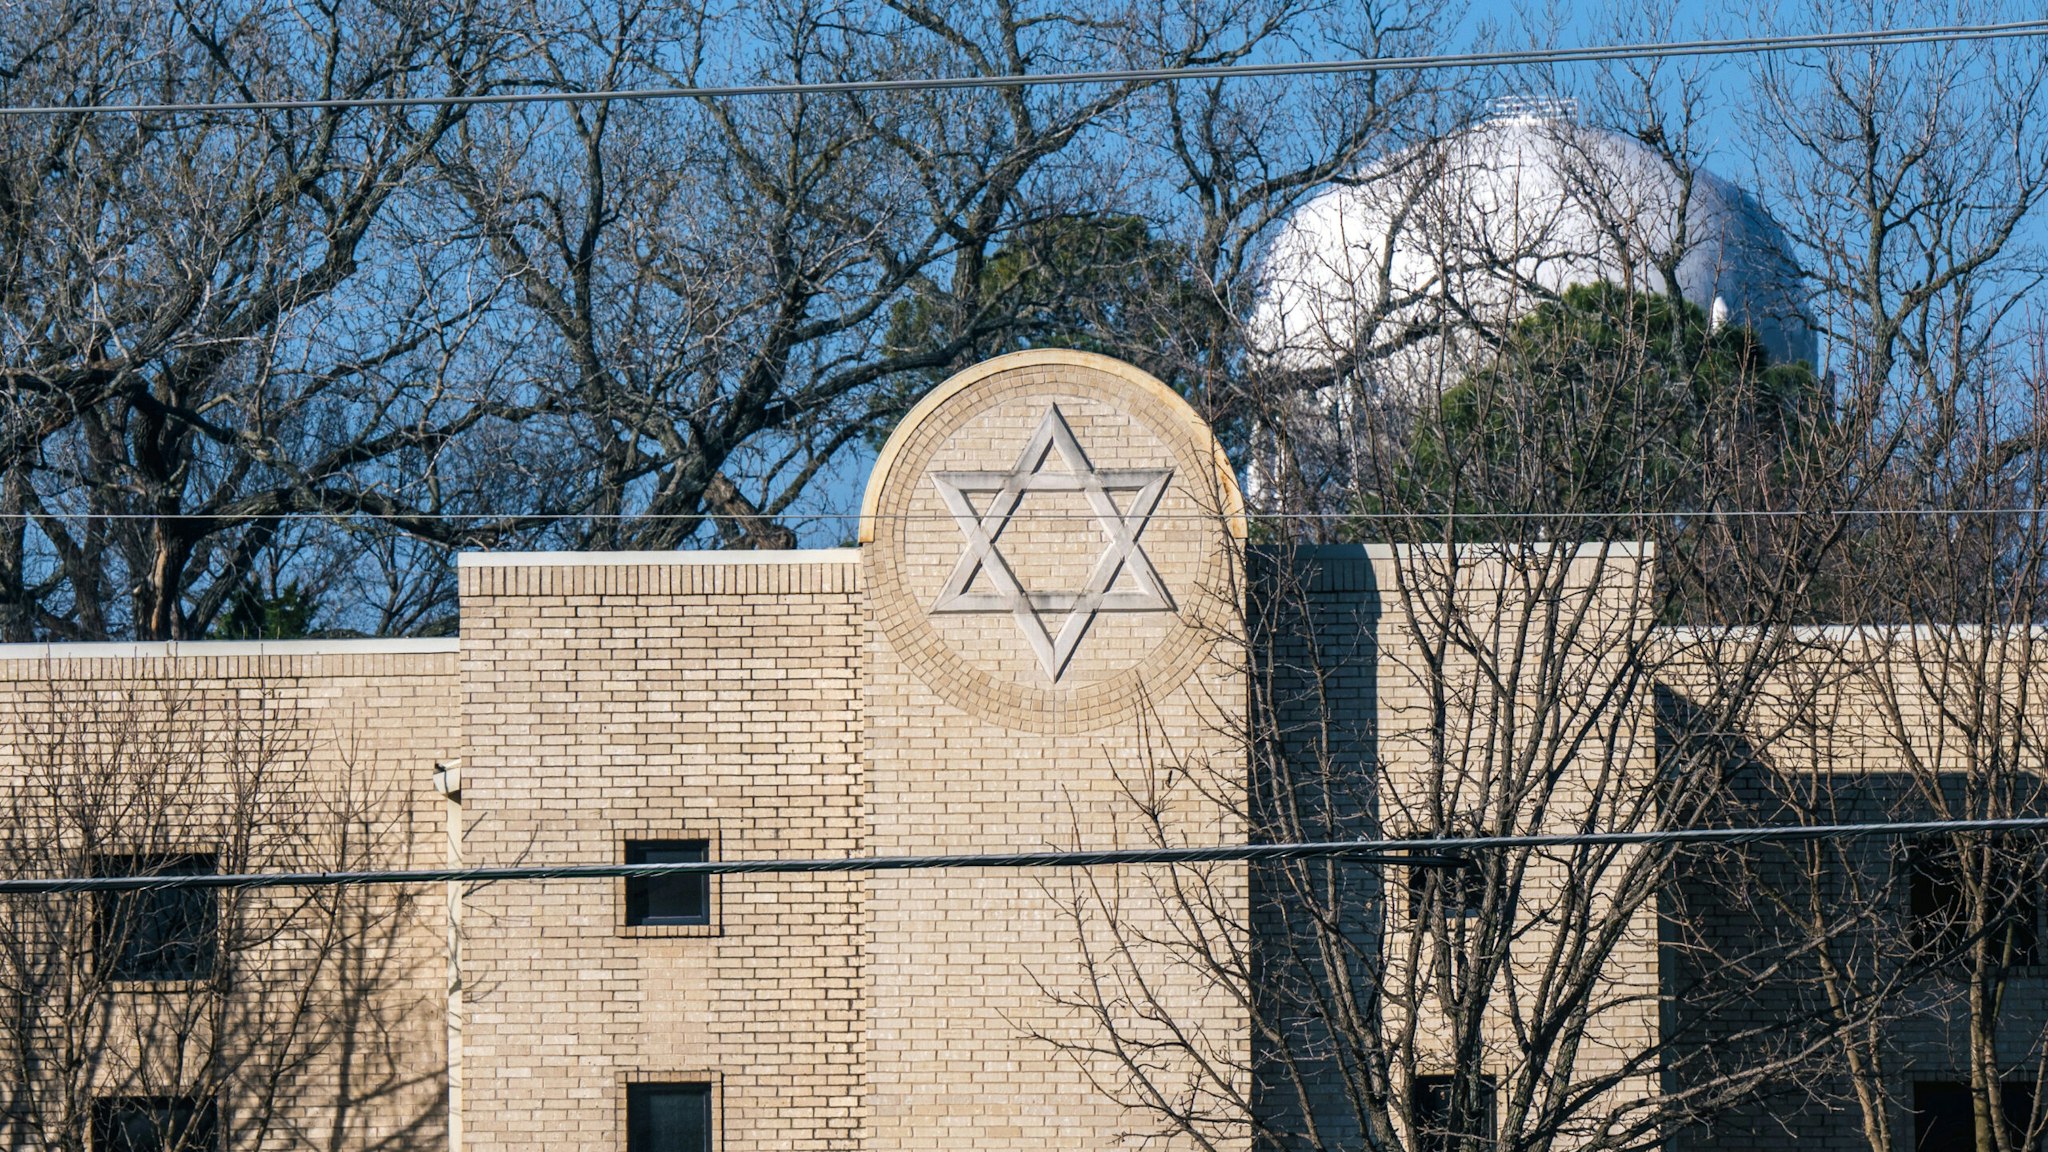 COLLEYVILLE, TEXAS - JANUARY 16: The Congregation Beth Israel synagogue is seen on January 16, 2022 in Colleyville, Texas. All four people who were held hostage at the Congregation Beth Israel synagogue have been safely released after more than 10 hours of being held captive by a gunman. Yesterday, police responded to a hostage situation after reports of a man with a gun was holding people captive.